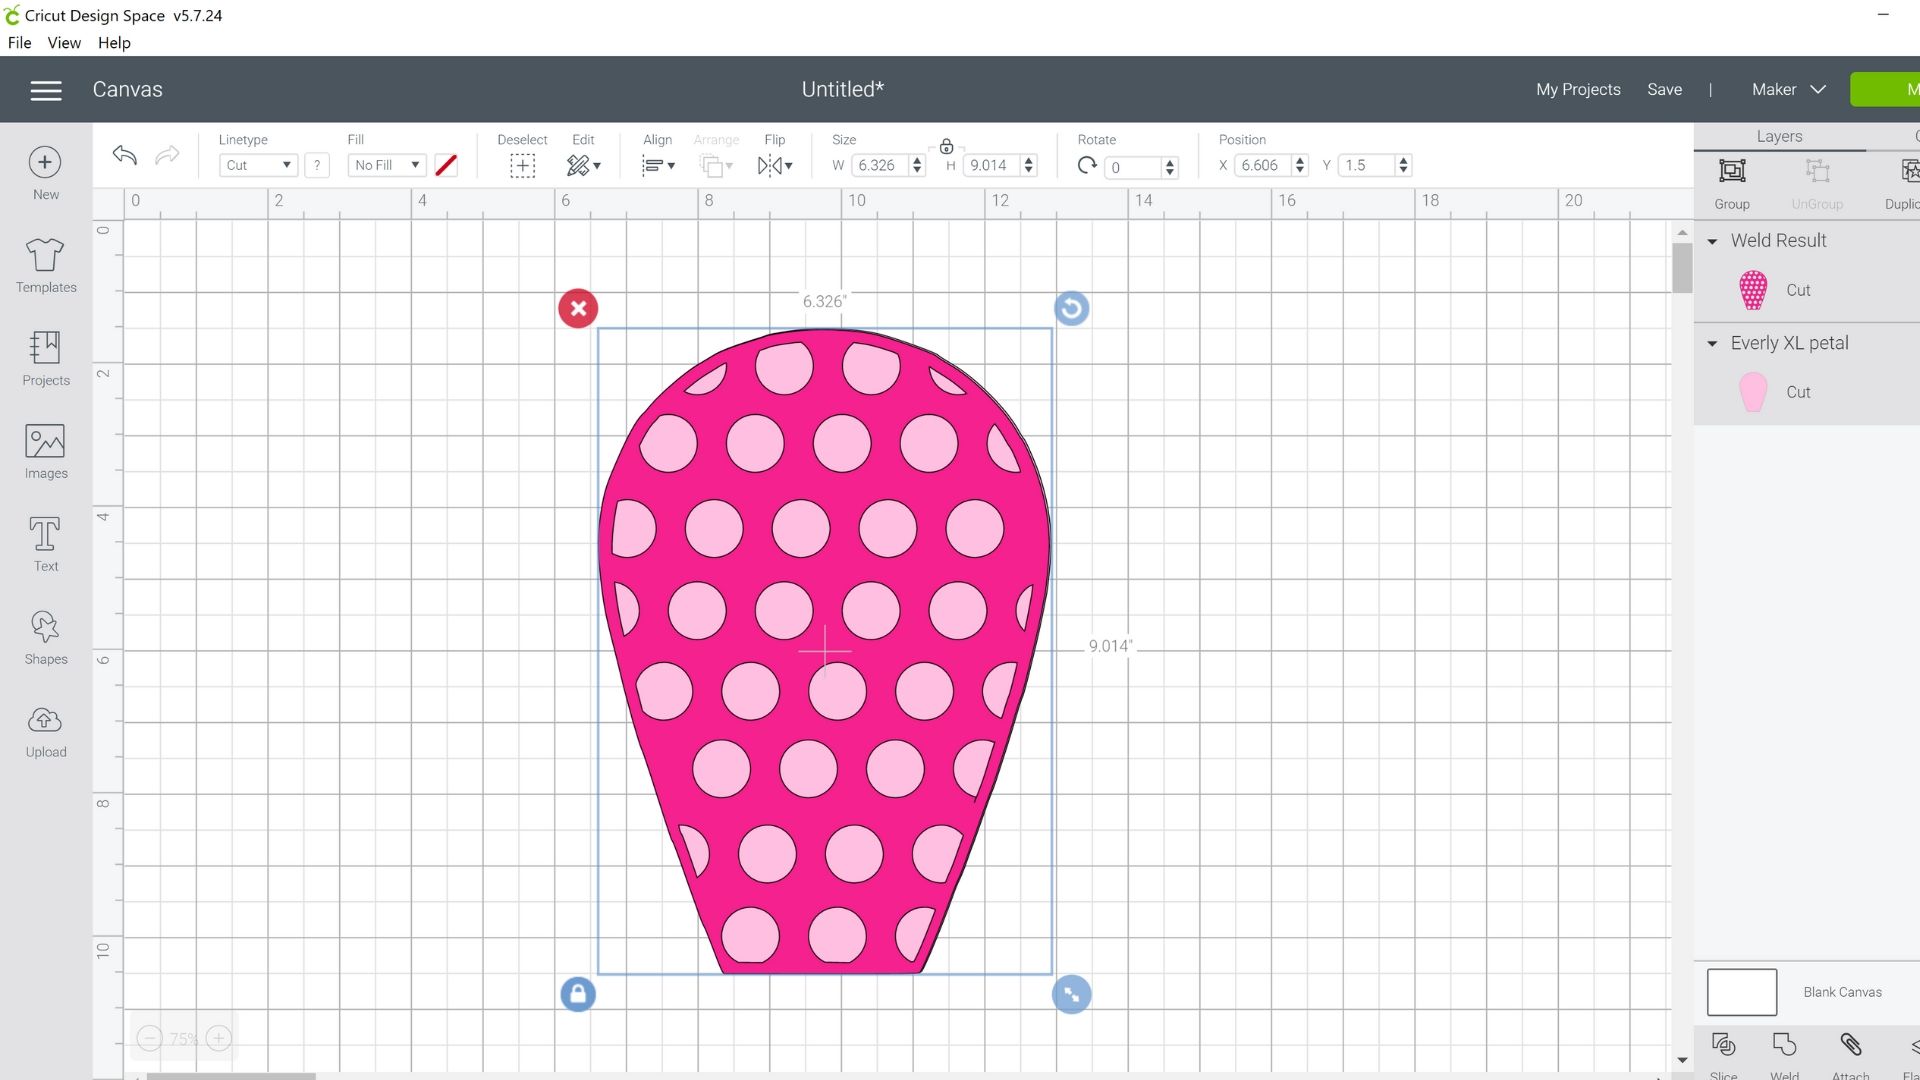 A screenshot of Design Space canvas with a single pink flower petal shape. The petal has a darker pink polka dot overlay with lighter pink polka dots.